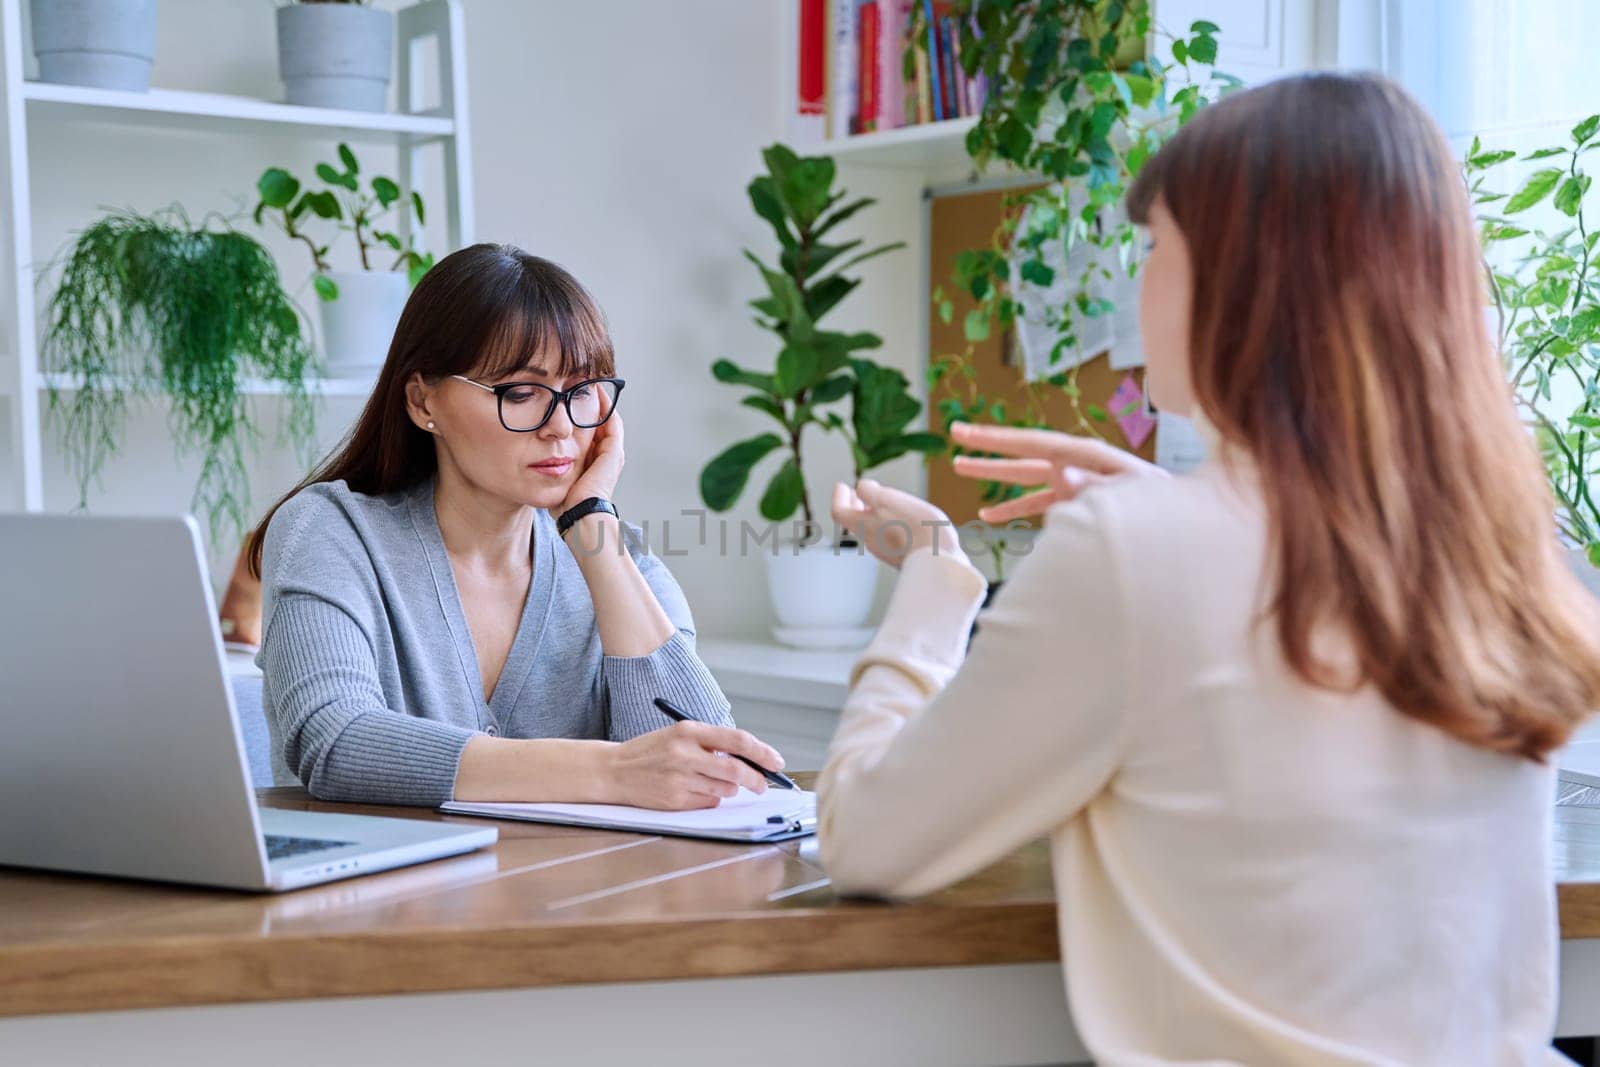 Middle-aged female psychologist, psychotherapist, counselor, social worker working with young woman patient. Psychology therapy professional help consultation treatment support mental health concept